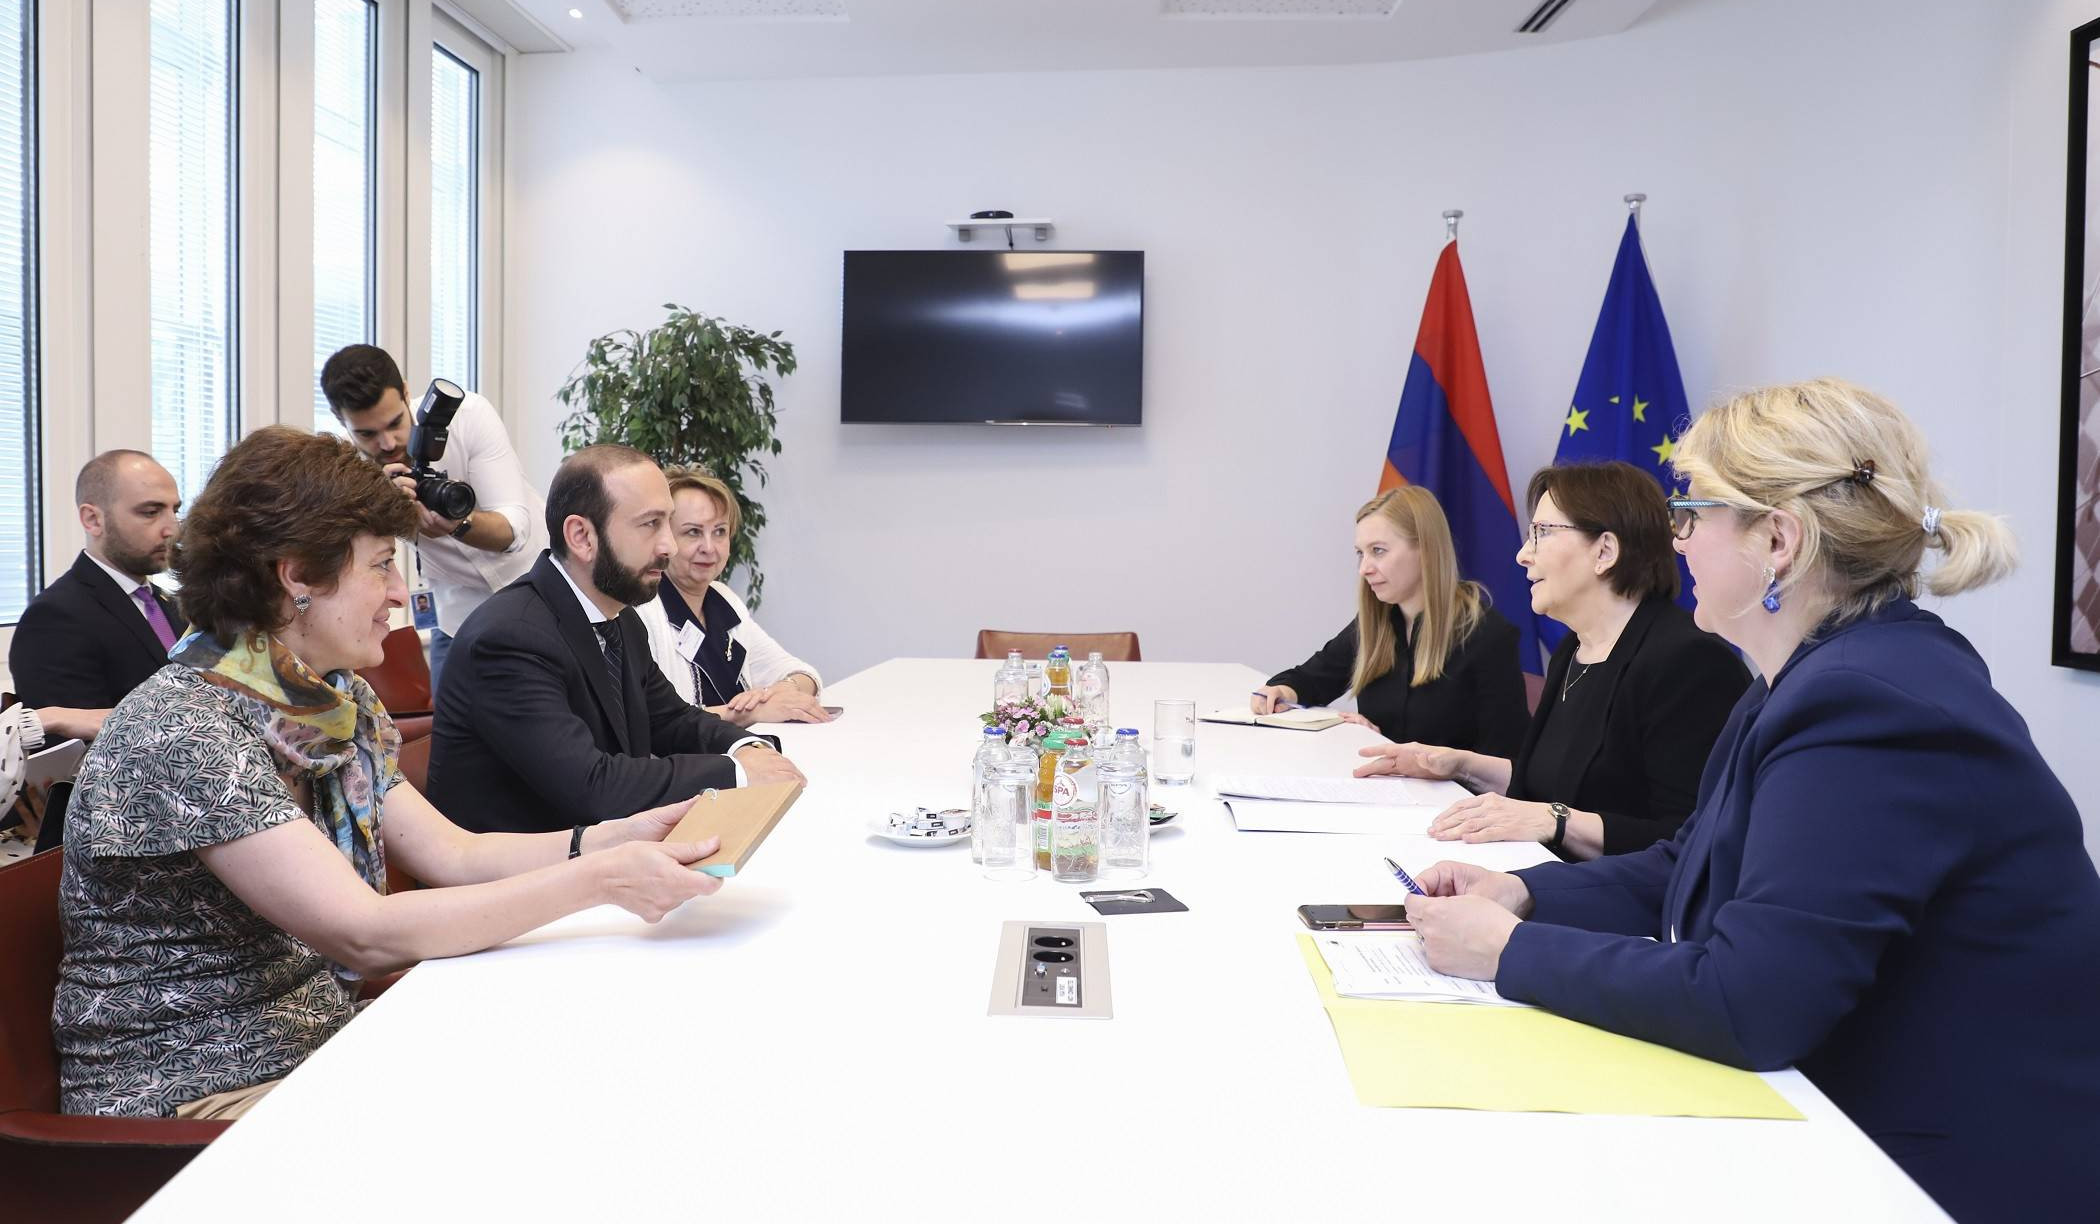 Meetings of the Foreign Minister of Armenia in the European Parliament